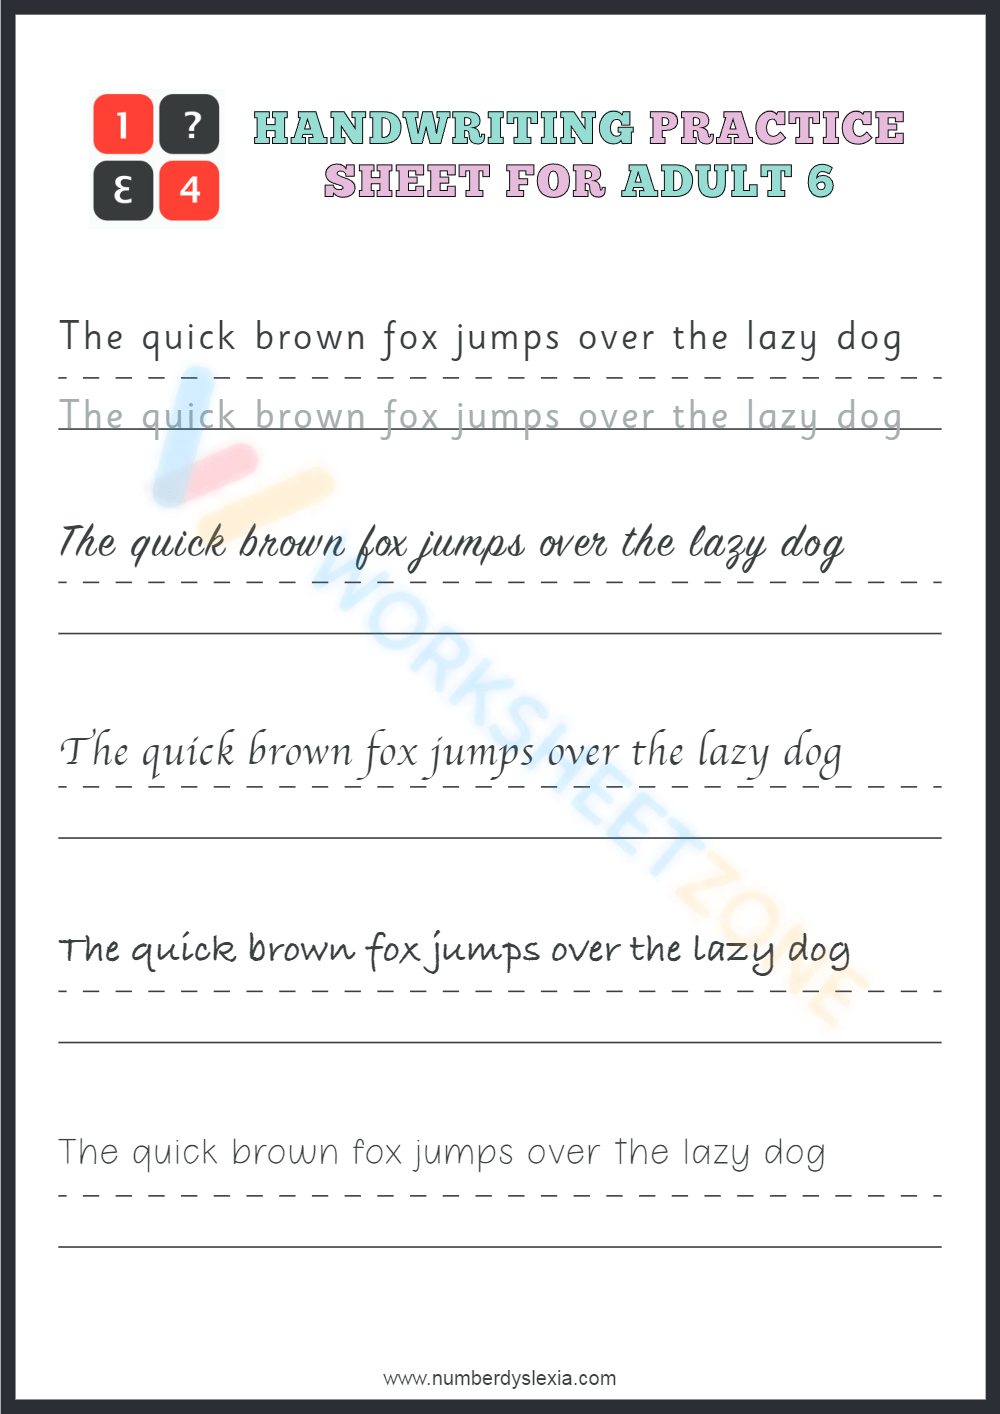 Handwriting Practice Worksheet For Adults - The Quick Brown Fox Jumps Over  The Lazy Dog